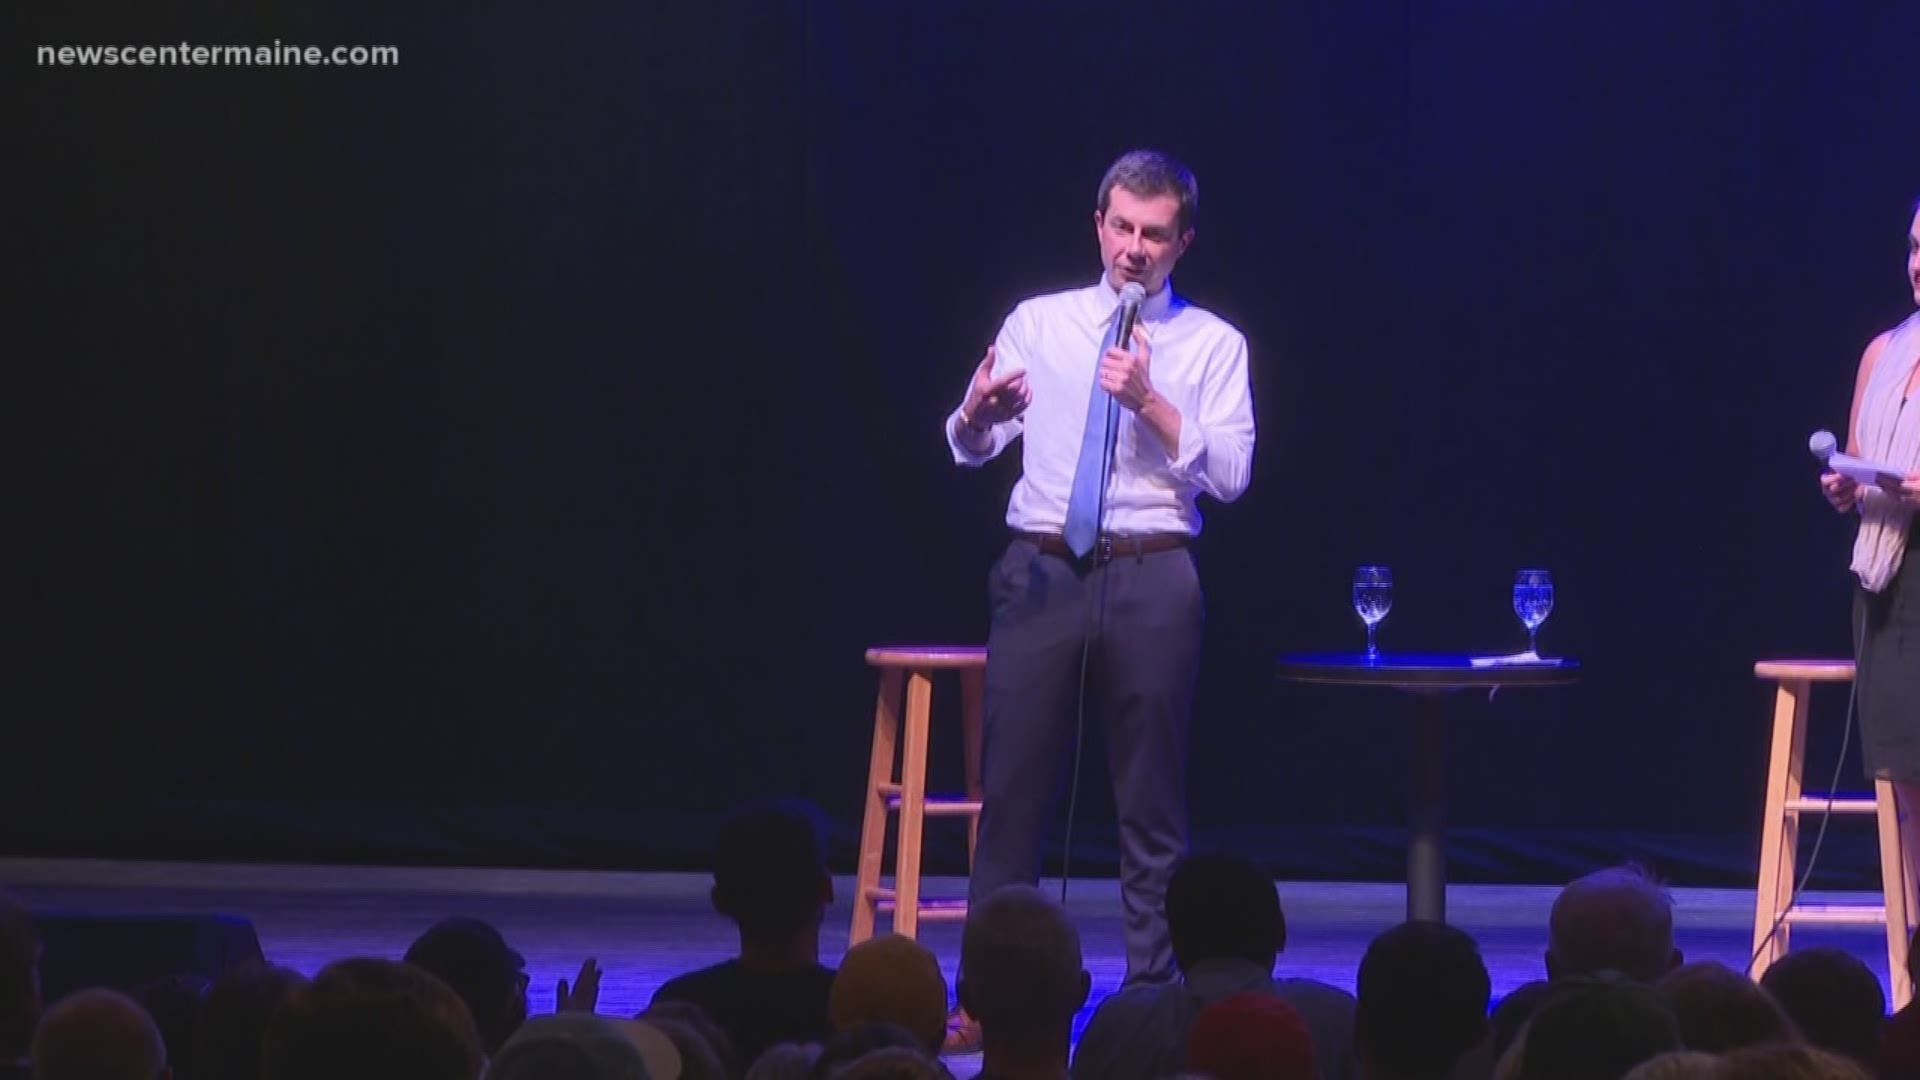 Mayor of South Bend, Indiana Pete Buttigieg visited Portland, Maine Thursday evening to hold a fundraising rally.